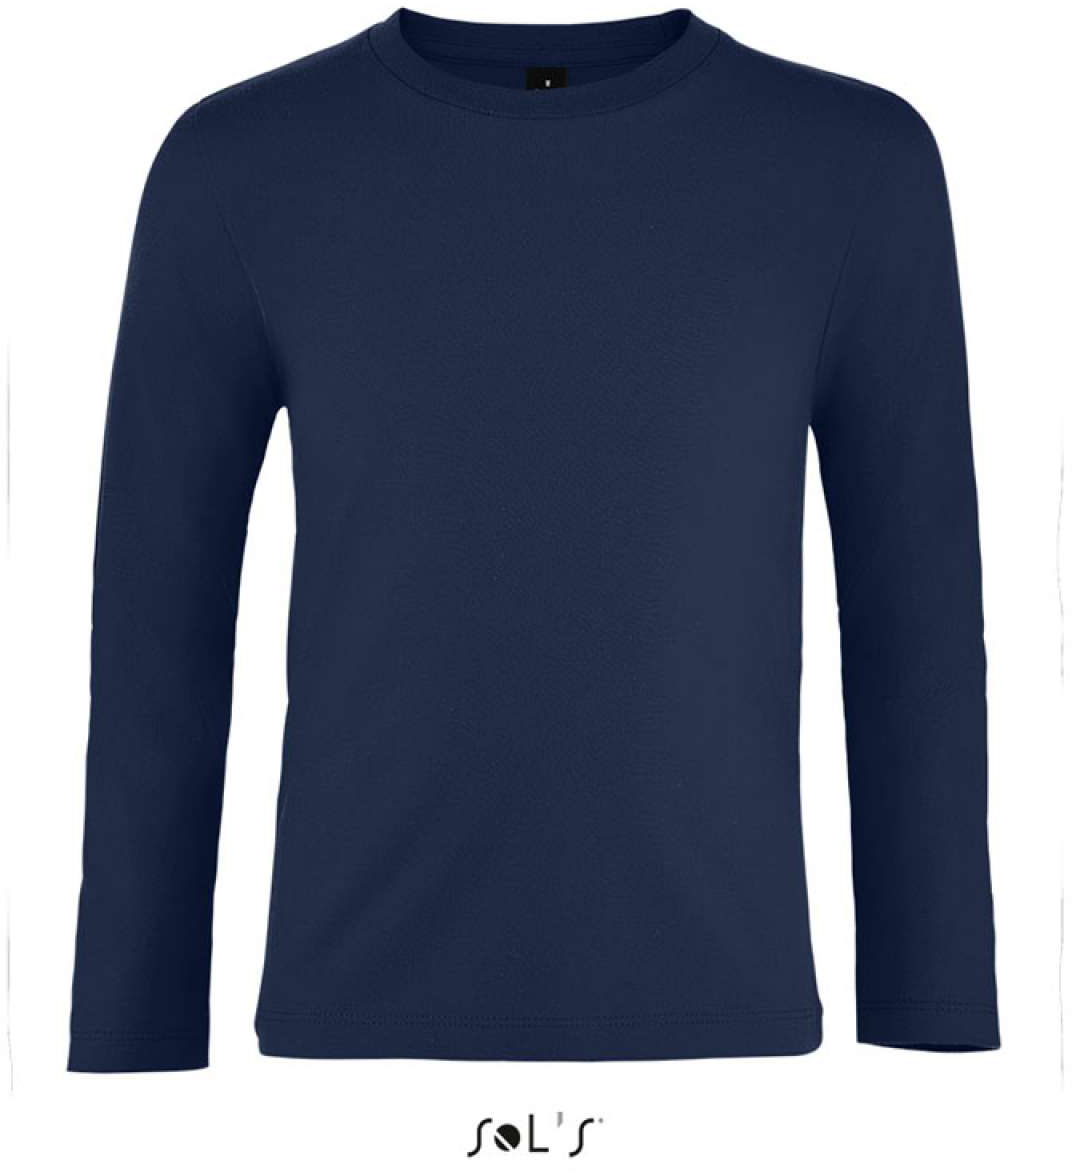 Sol's imperial Lsl Kids - Long Sleeve T-shirt - Sol's imperial Lsl Kids - Long Sleeve T-shirt - Navy